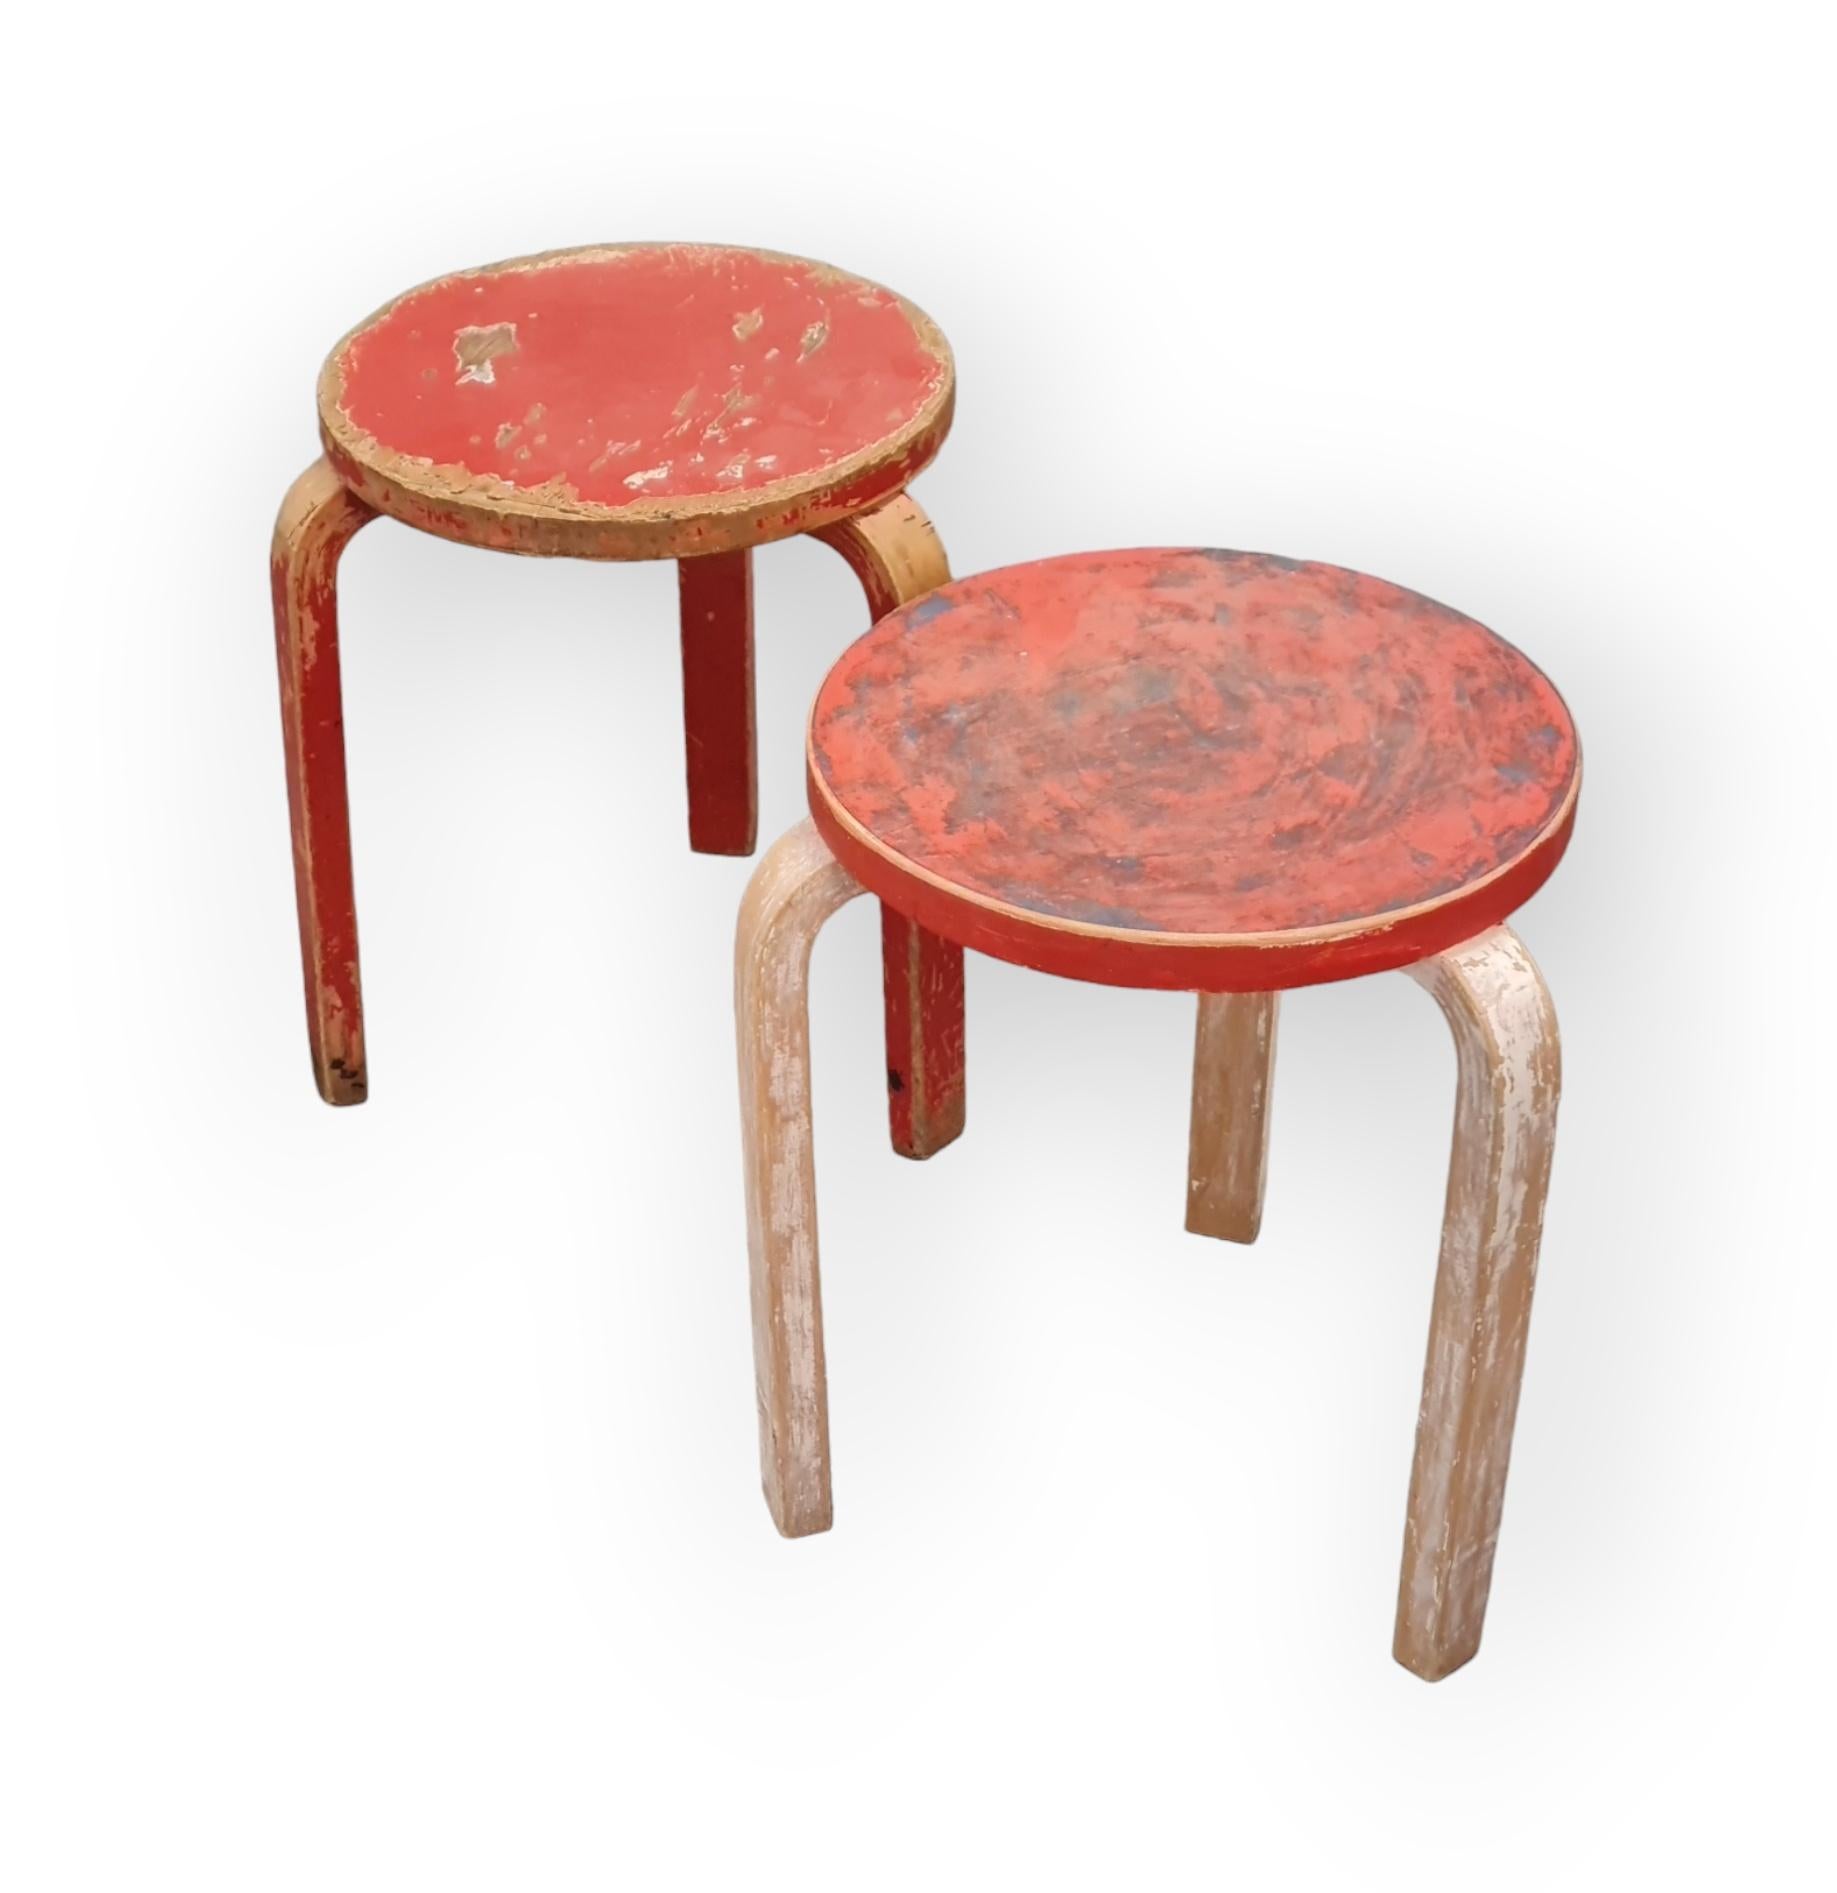 A pair of Artek stools in birch and muliti layered colourful beautiful patina, designed by Alvar Aalto and retailed by Artek in the 1950s. The model 60 stool is perhaps the most well known Aalto design and has always been attractive to people. As